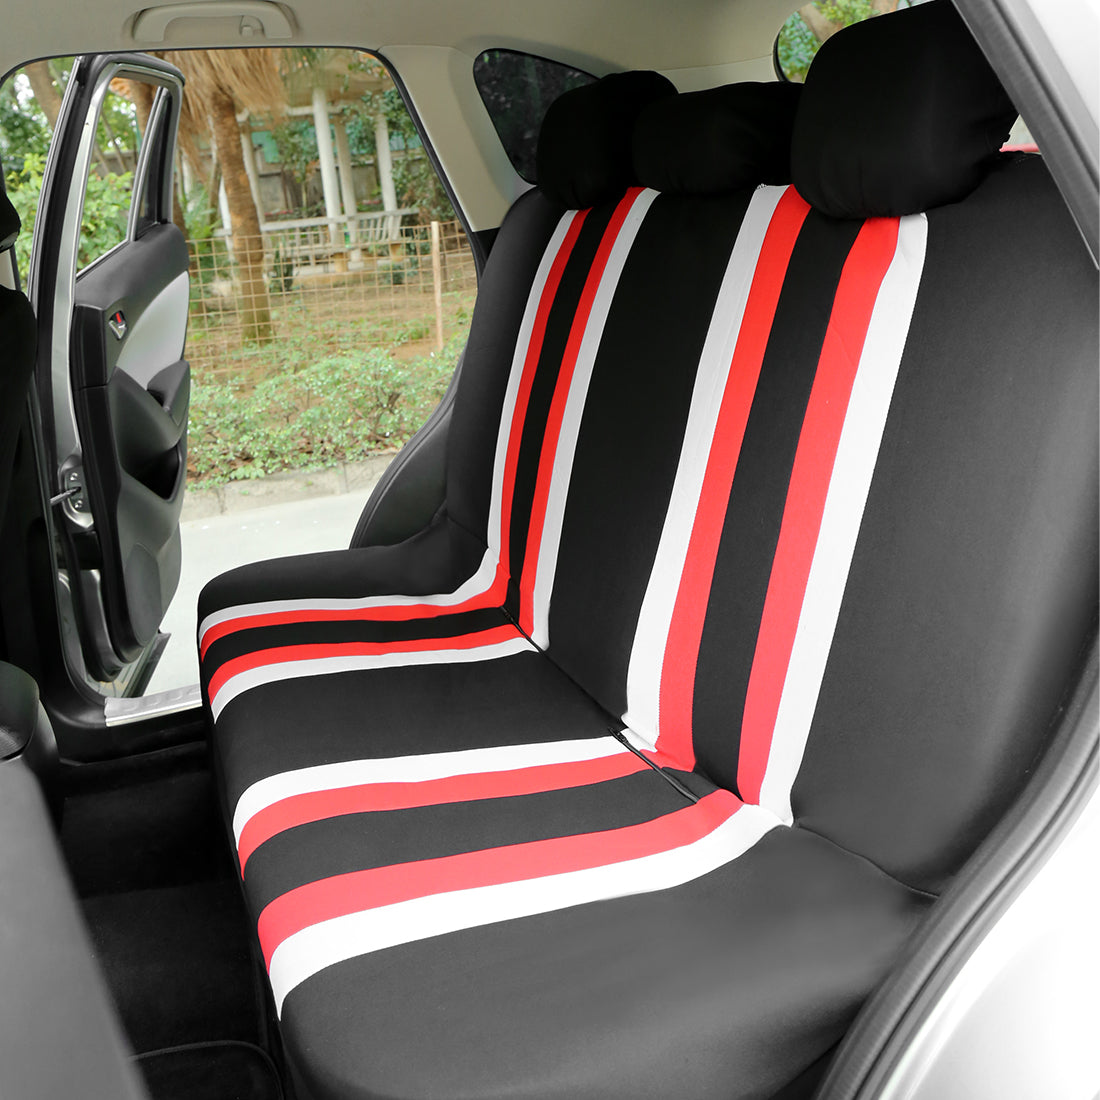 uxcell Uxcell Universal Front Back Seat Cover Cushion Mat Protector for Car SUV Truck Black Red White Polyester Mesh 8pcs